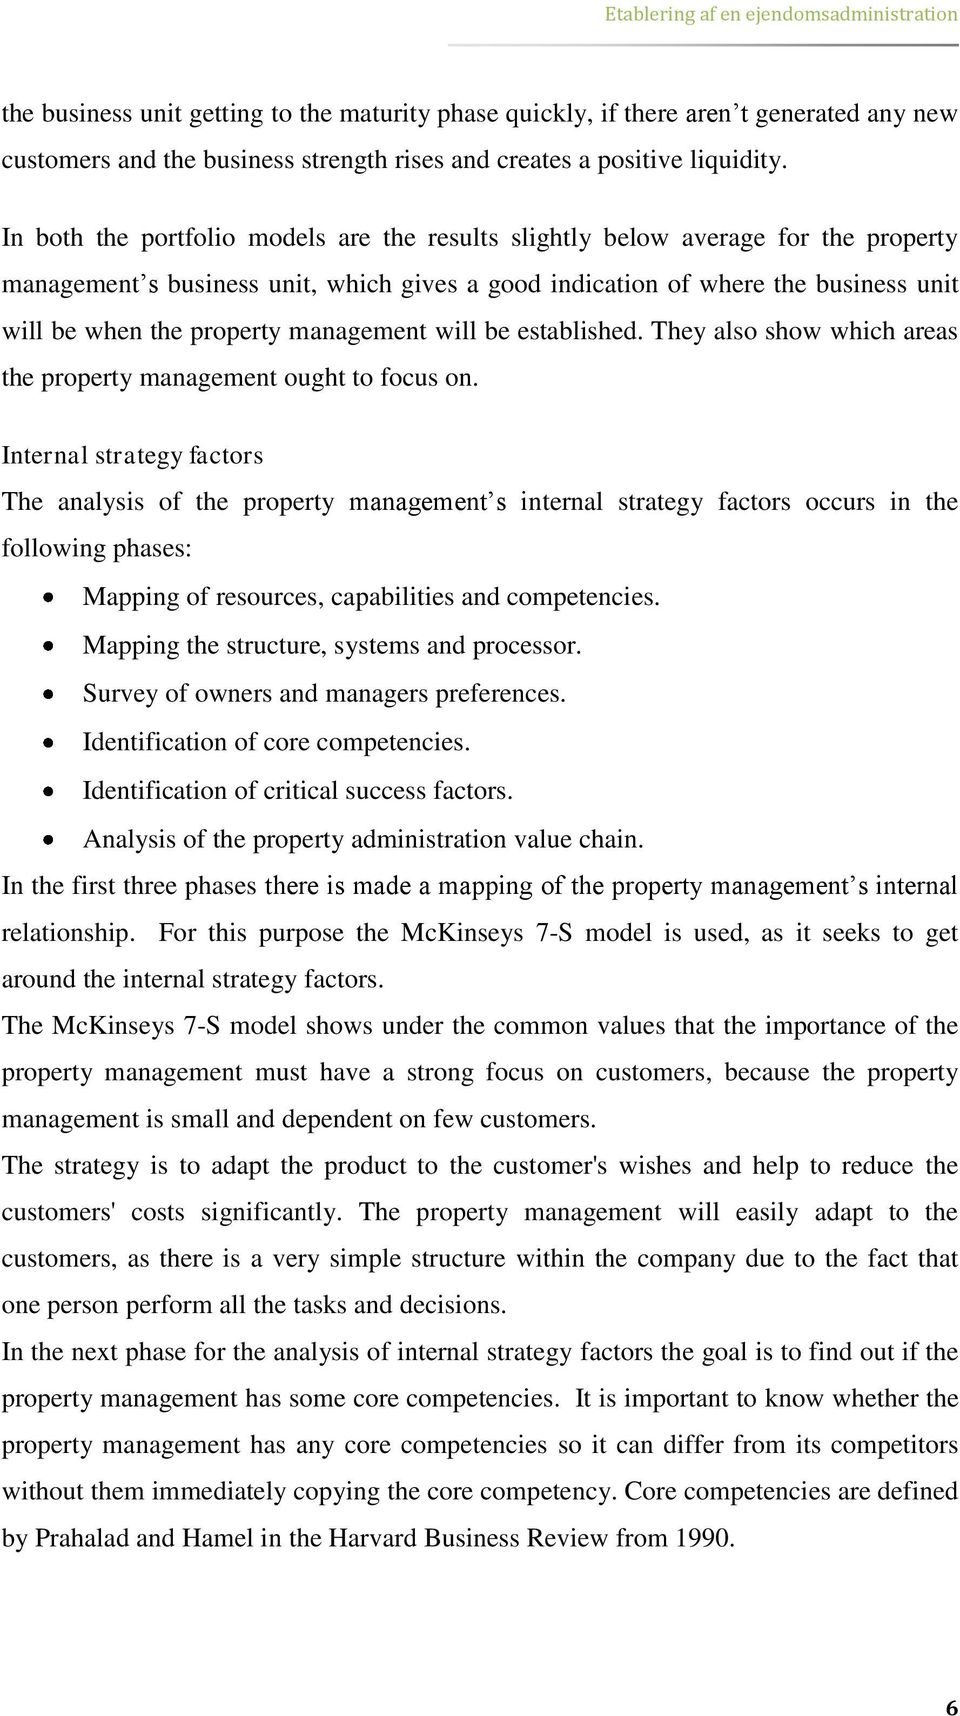 management will be established. They also show which areas the property management ought to focus on.